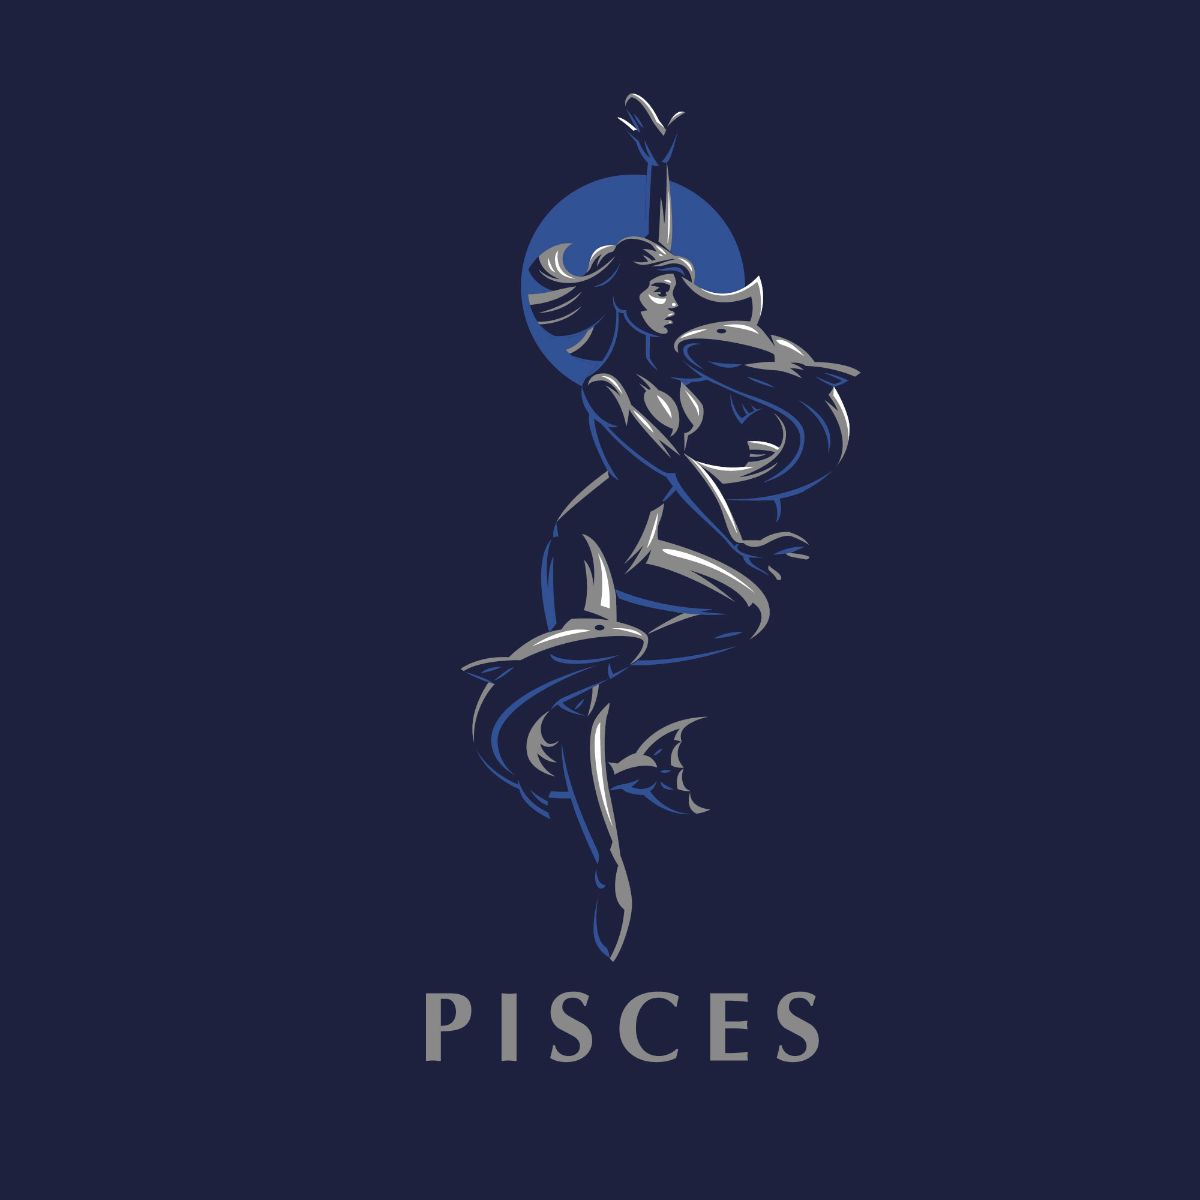 Why are Pisces hated so much